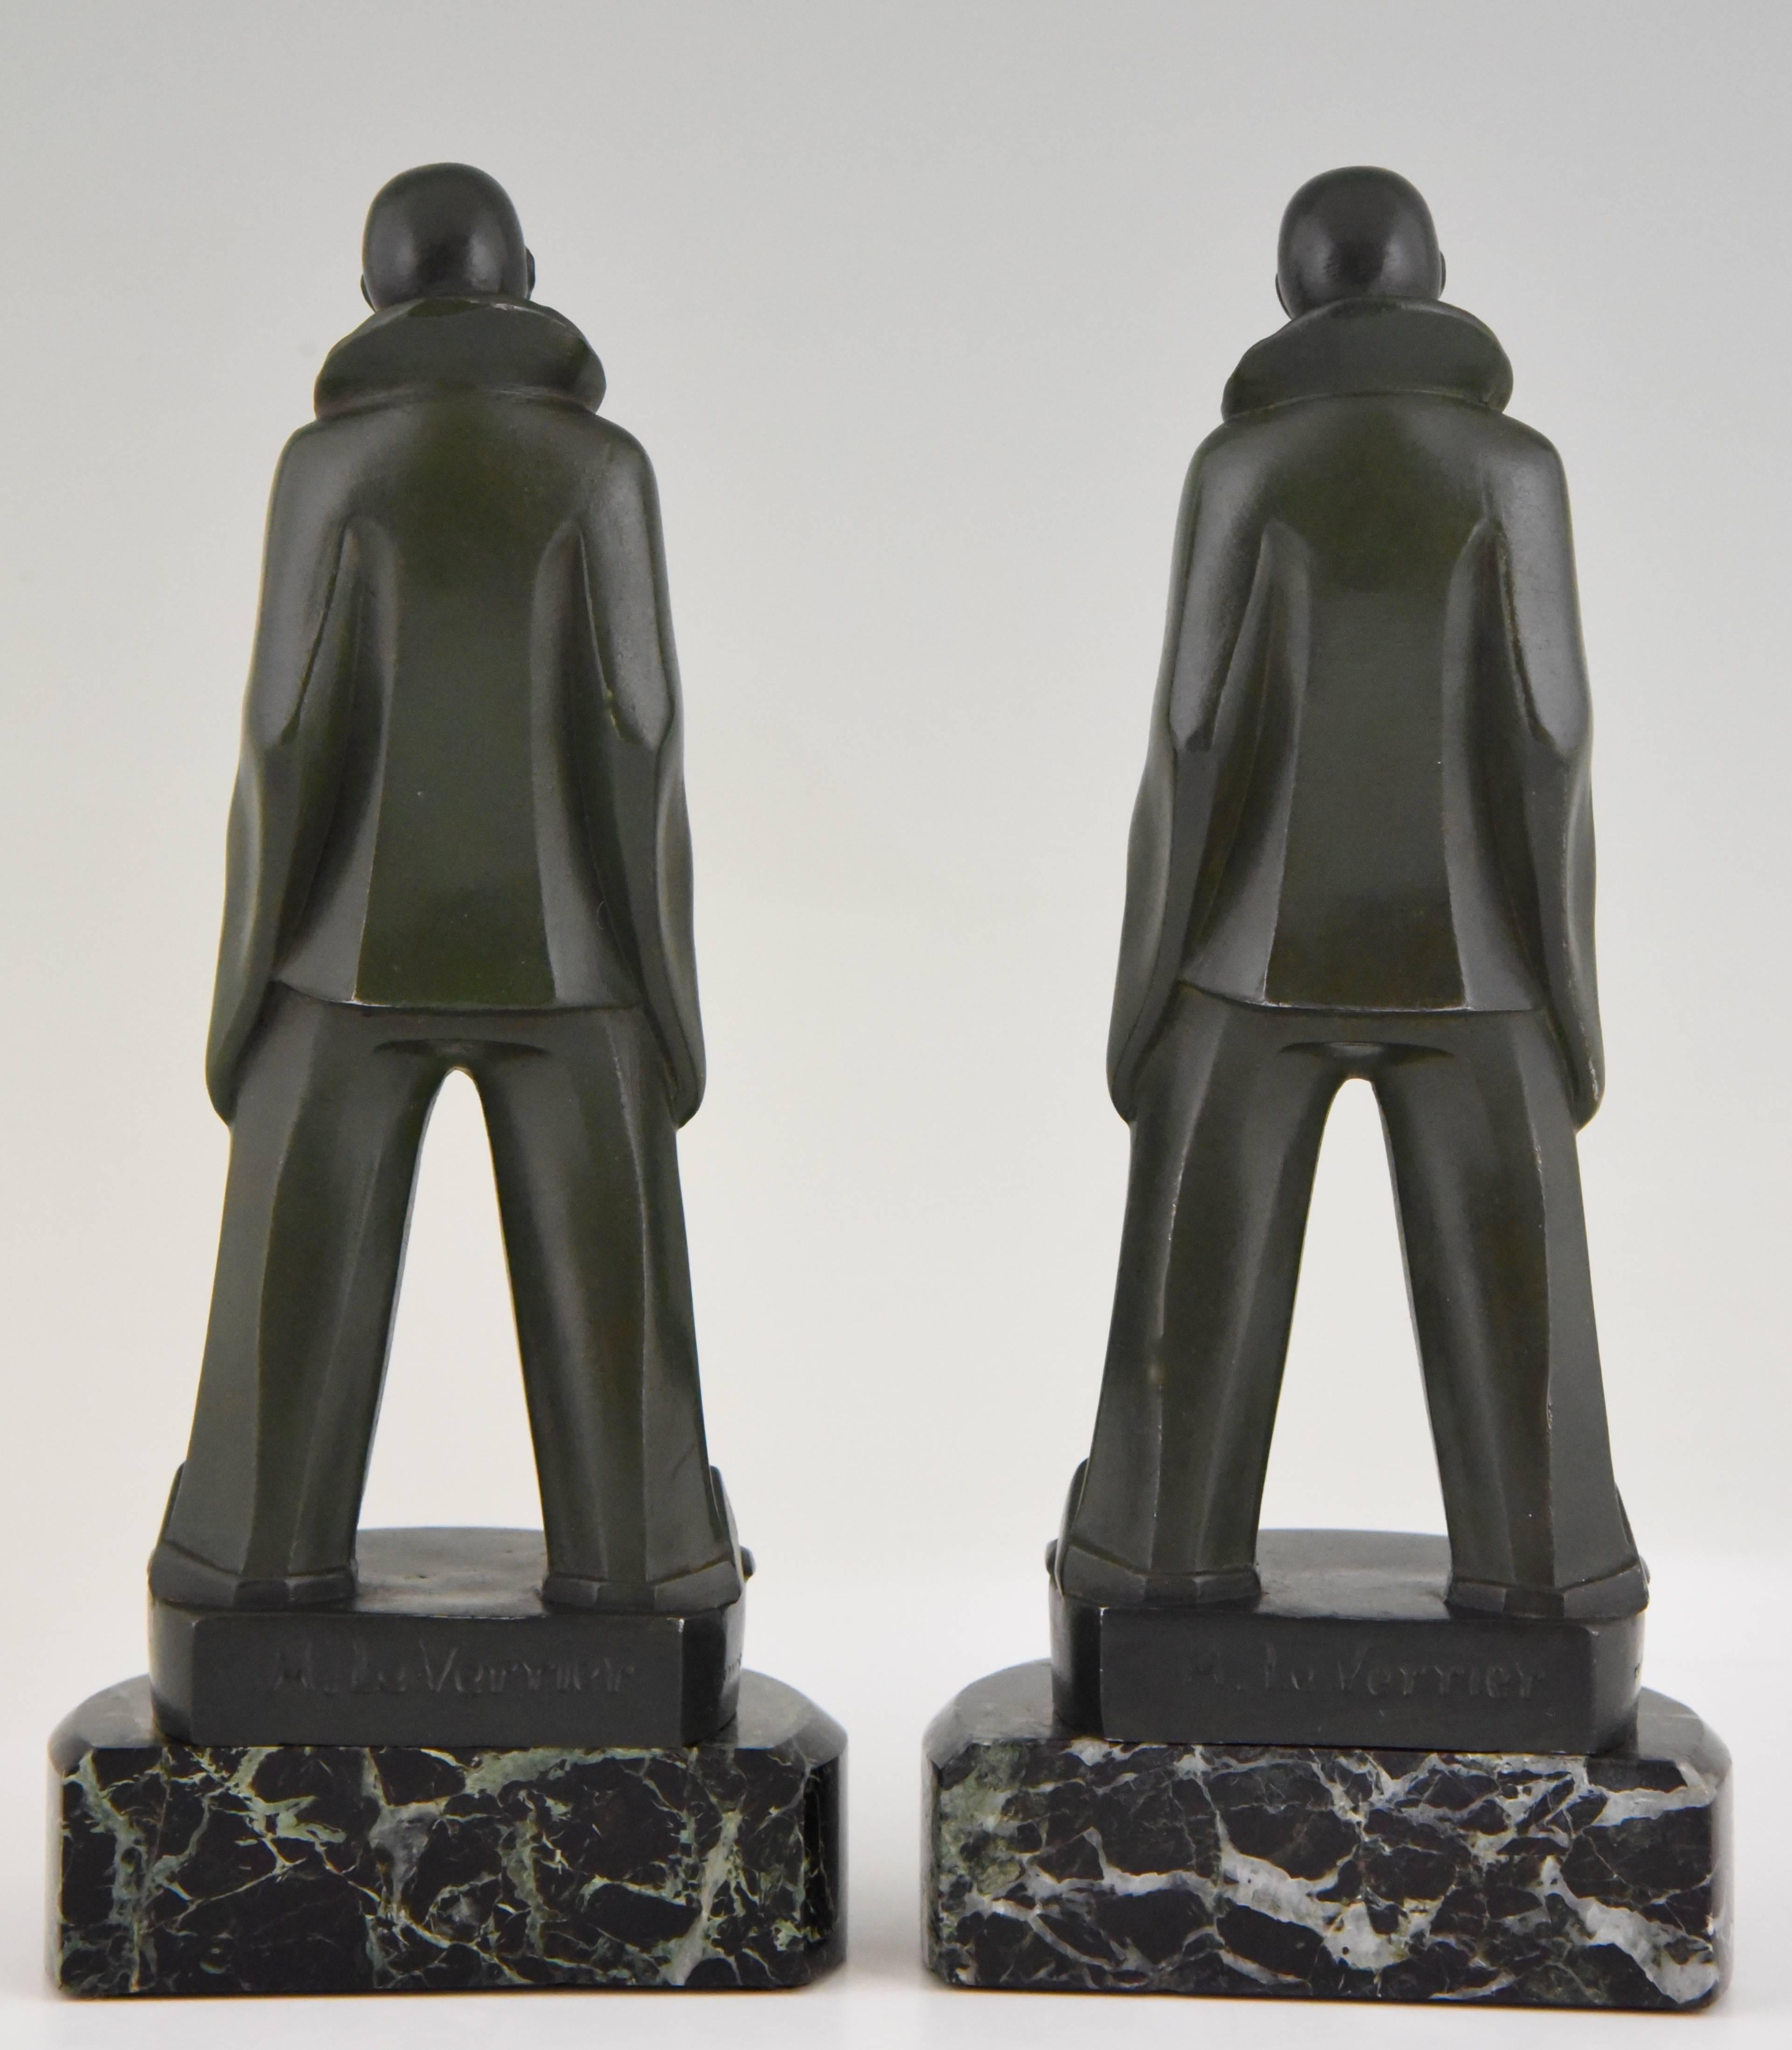 Patinated Art Deco Pierrot Bookends by Max Le Verrier  France 1930